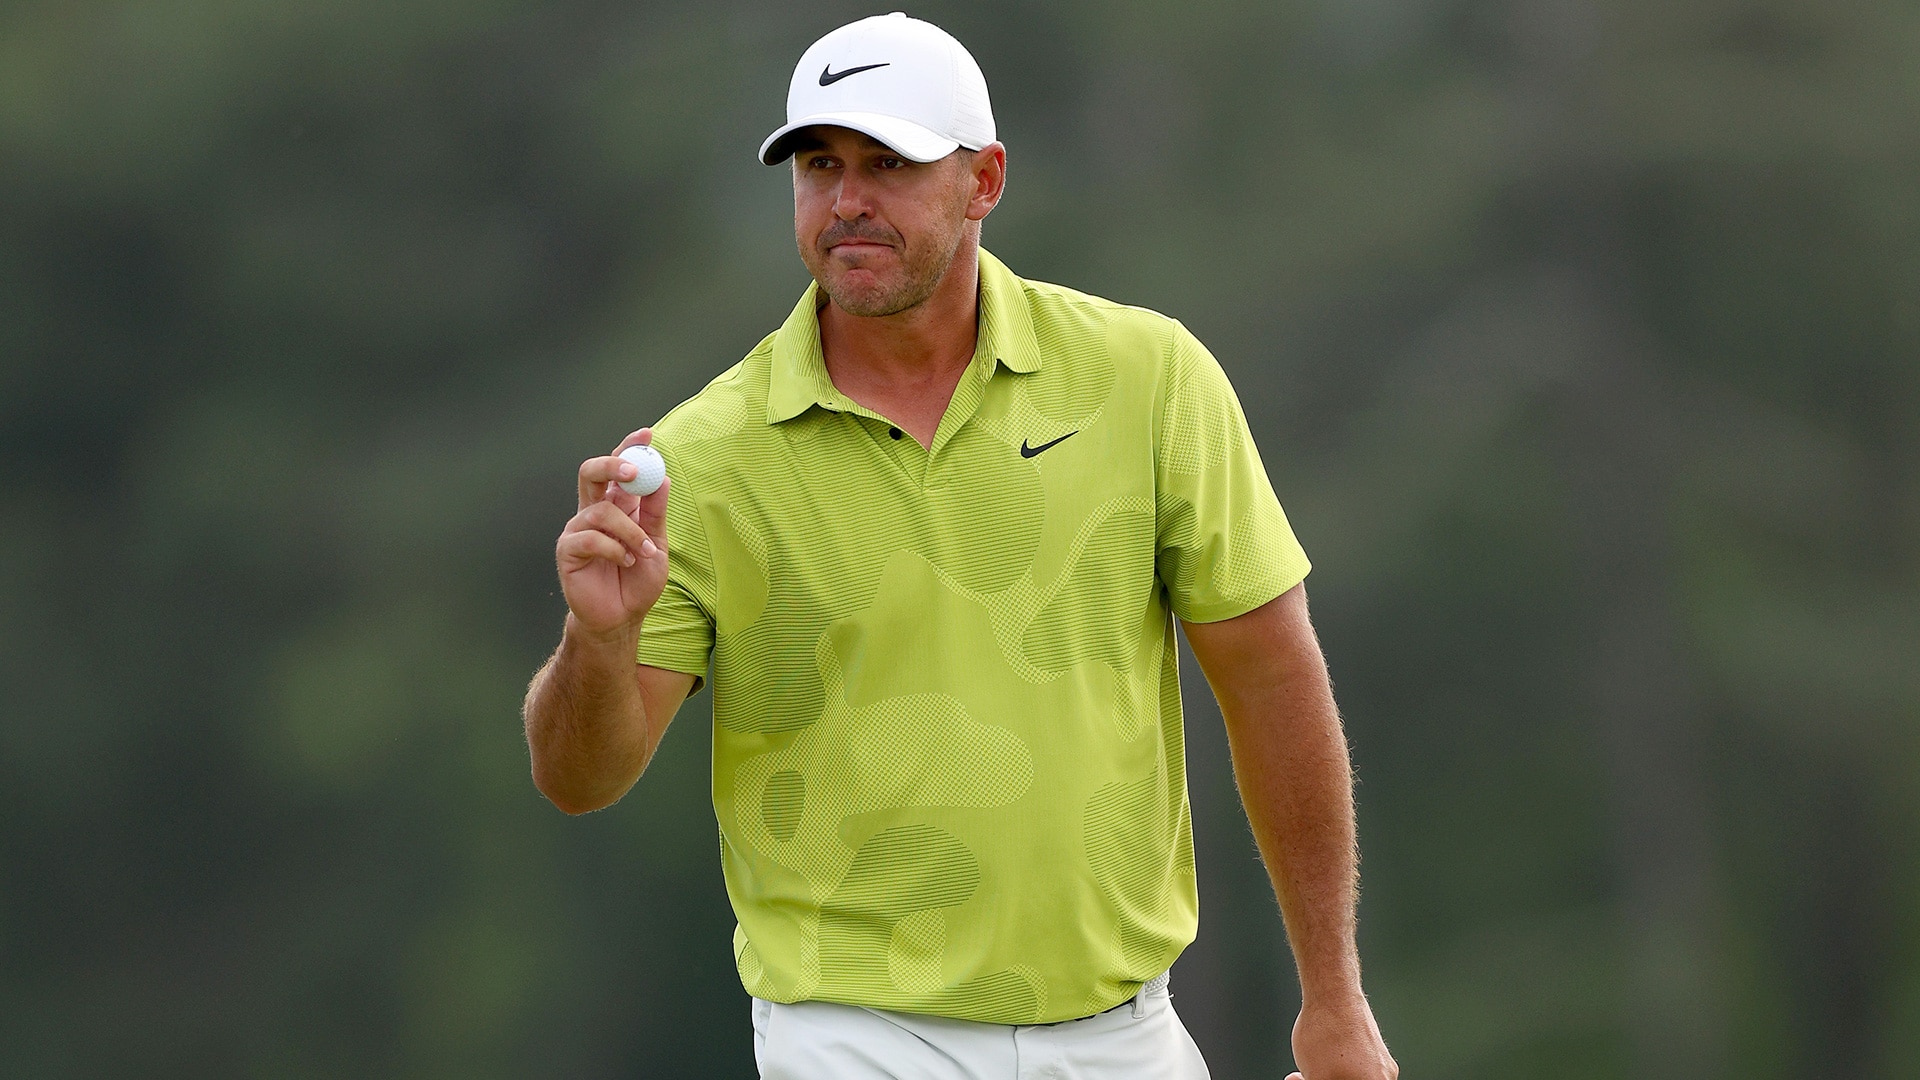 2023 Masters: Is Major Brooks Koepka back? Sure looked like it Thursday at Augusta National